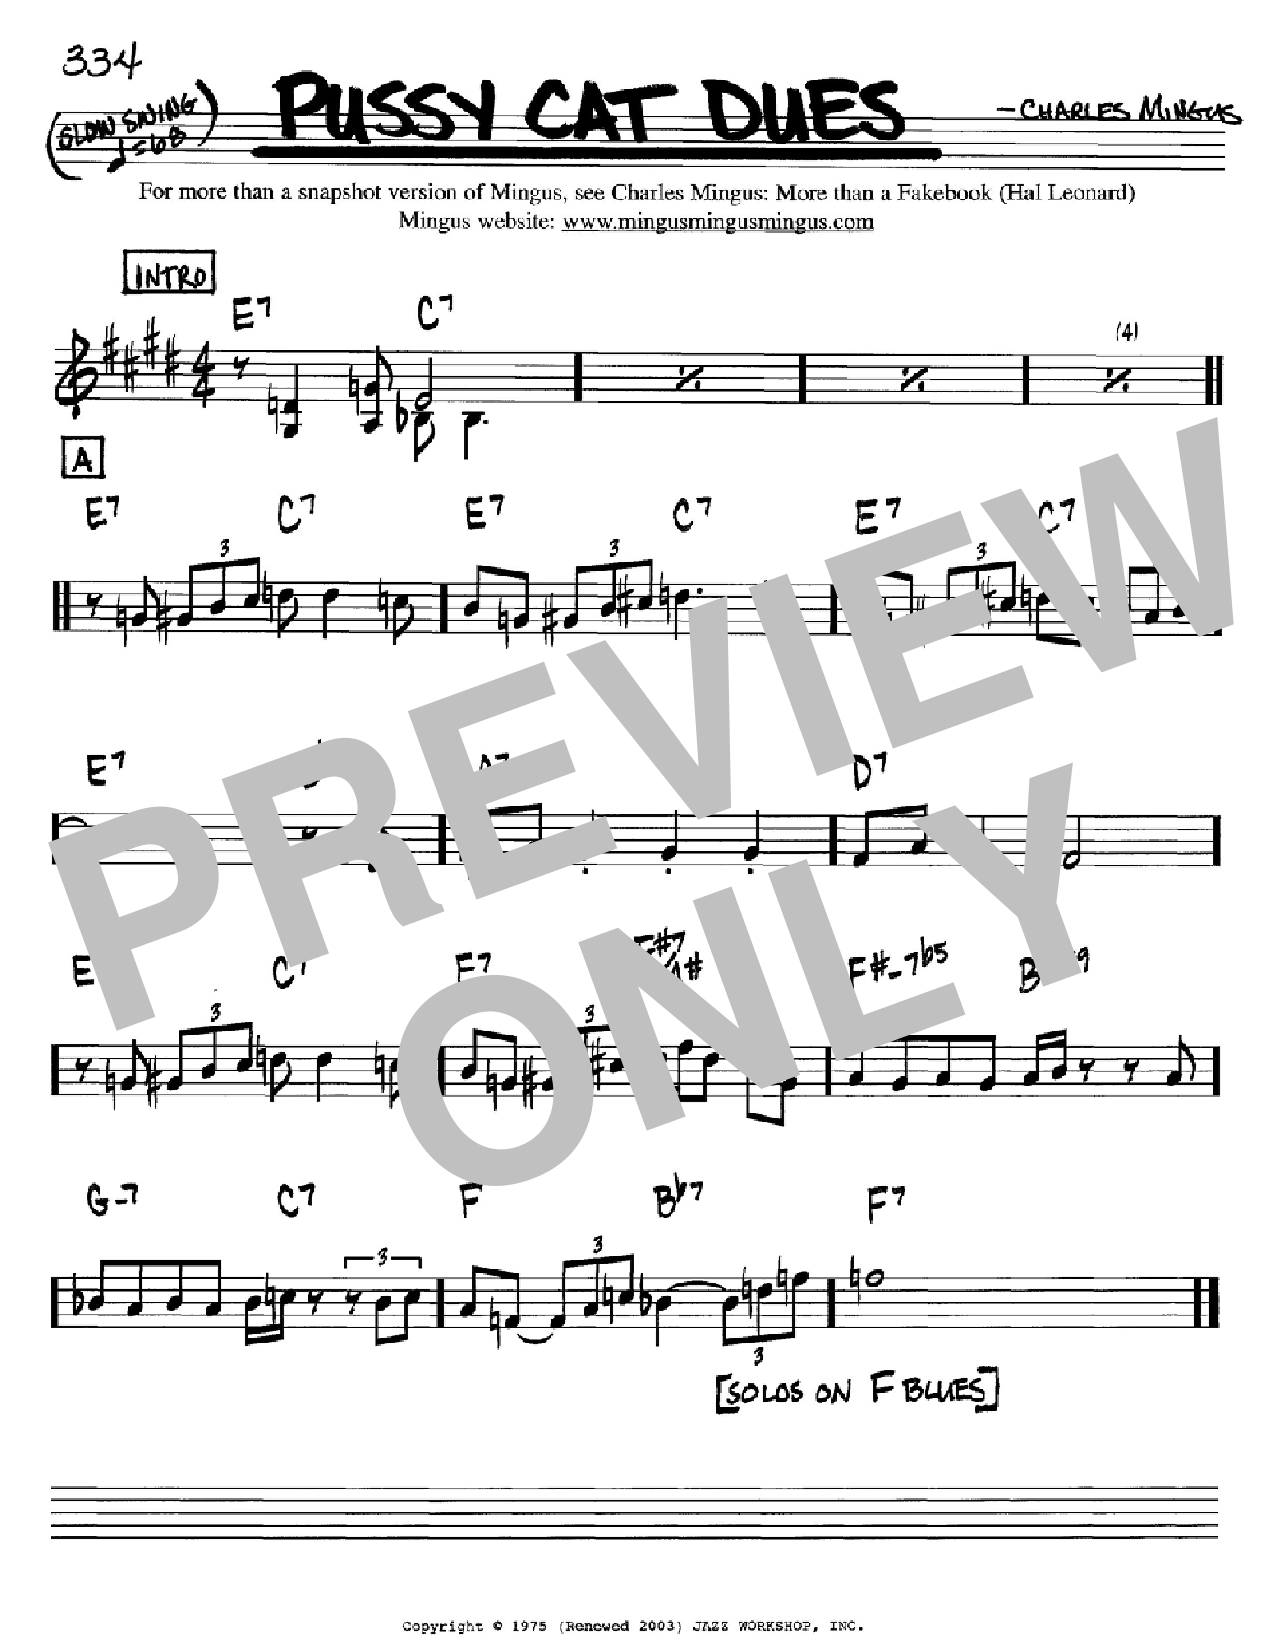 Download Charles Mingus Pussy Cat Dues Sheet Music